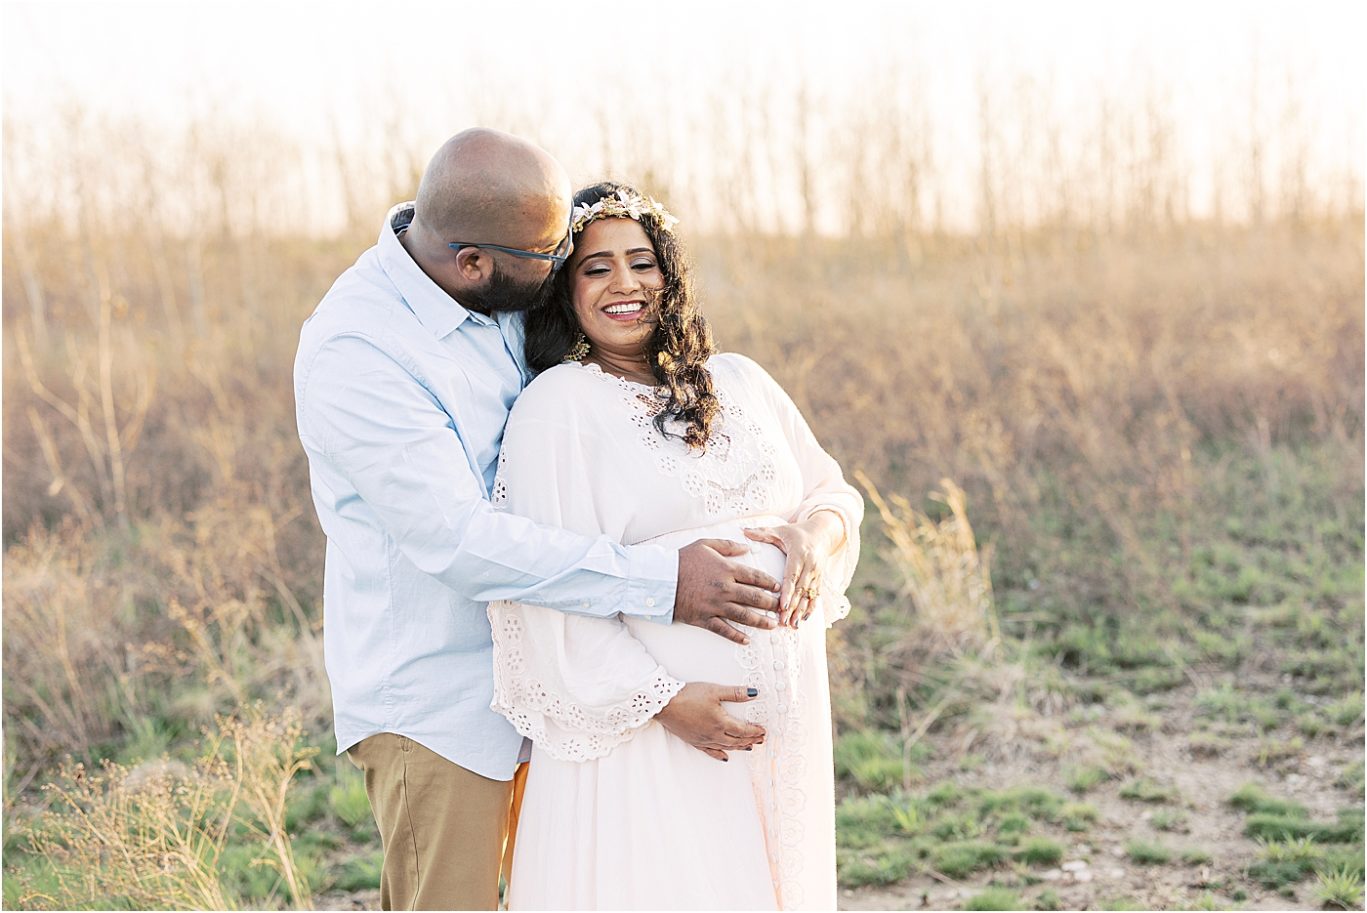 Outdoor maternity session with Natural light photographer in Indy, Lindsay Konopa Photography.